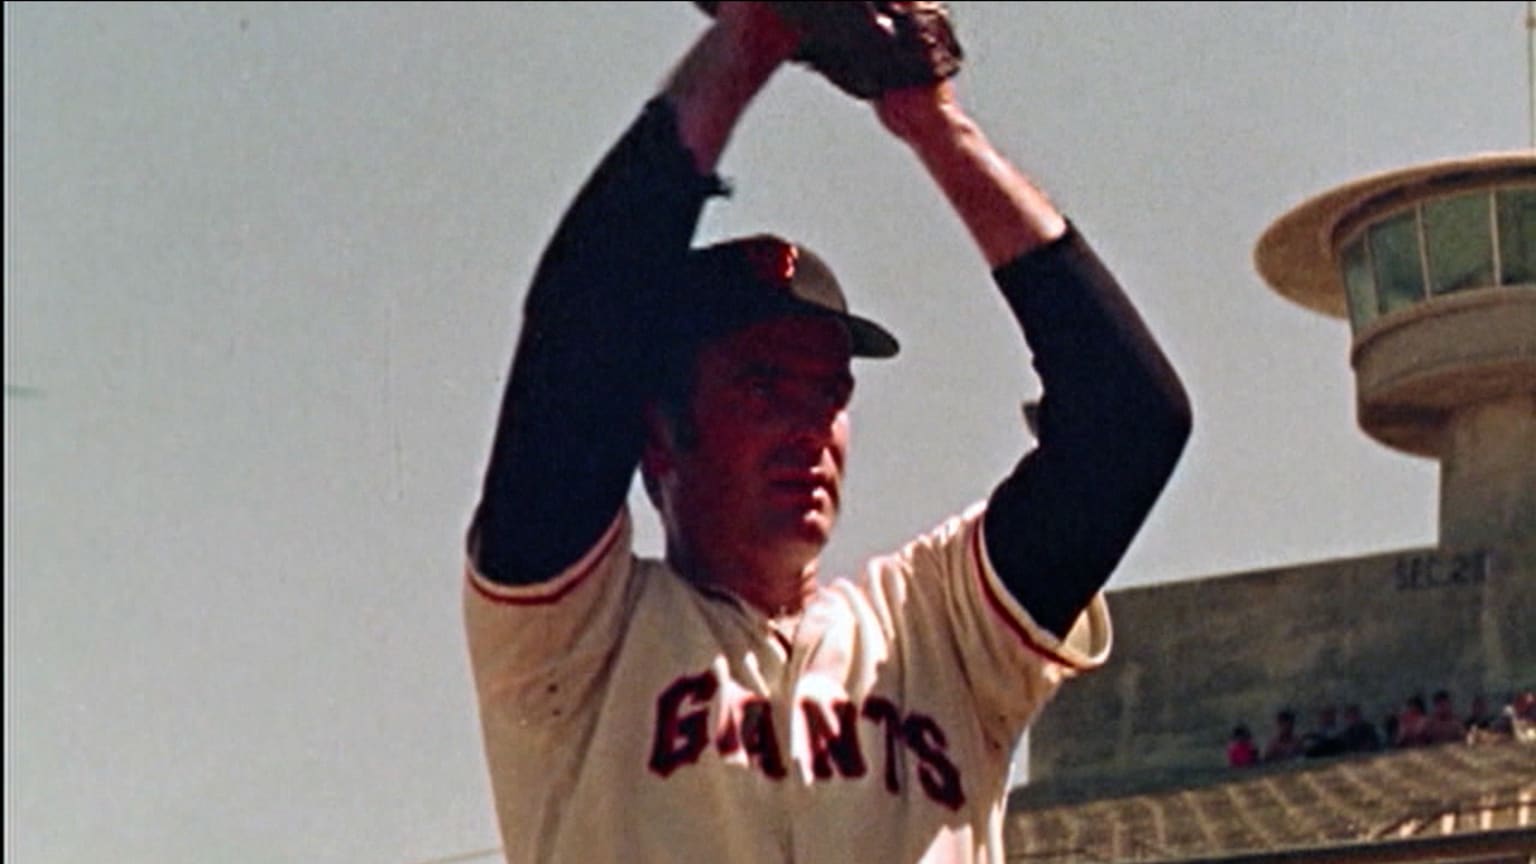 Rubino: Giants' new statue of Gaylord Perry a strange tribute